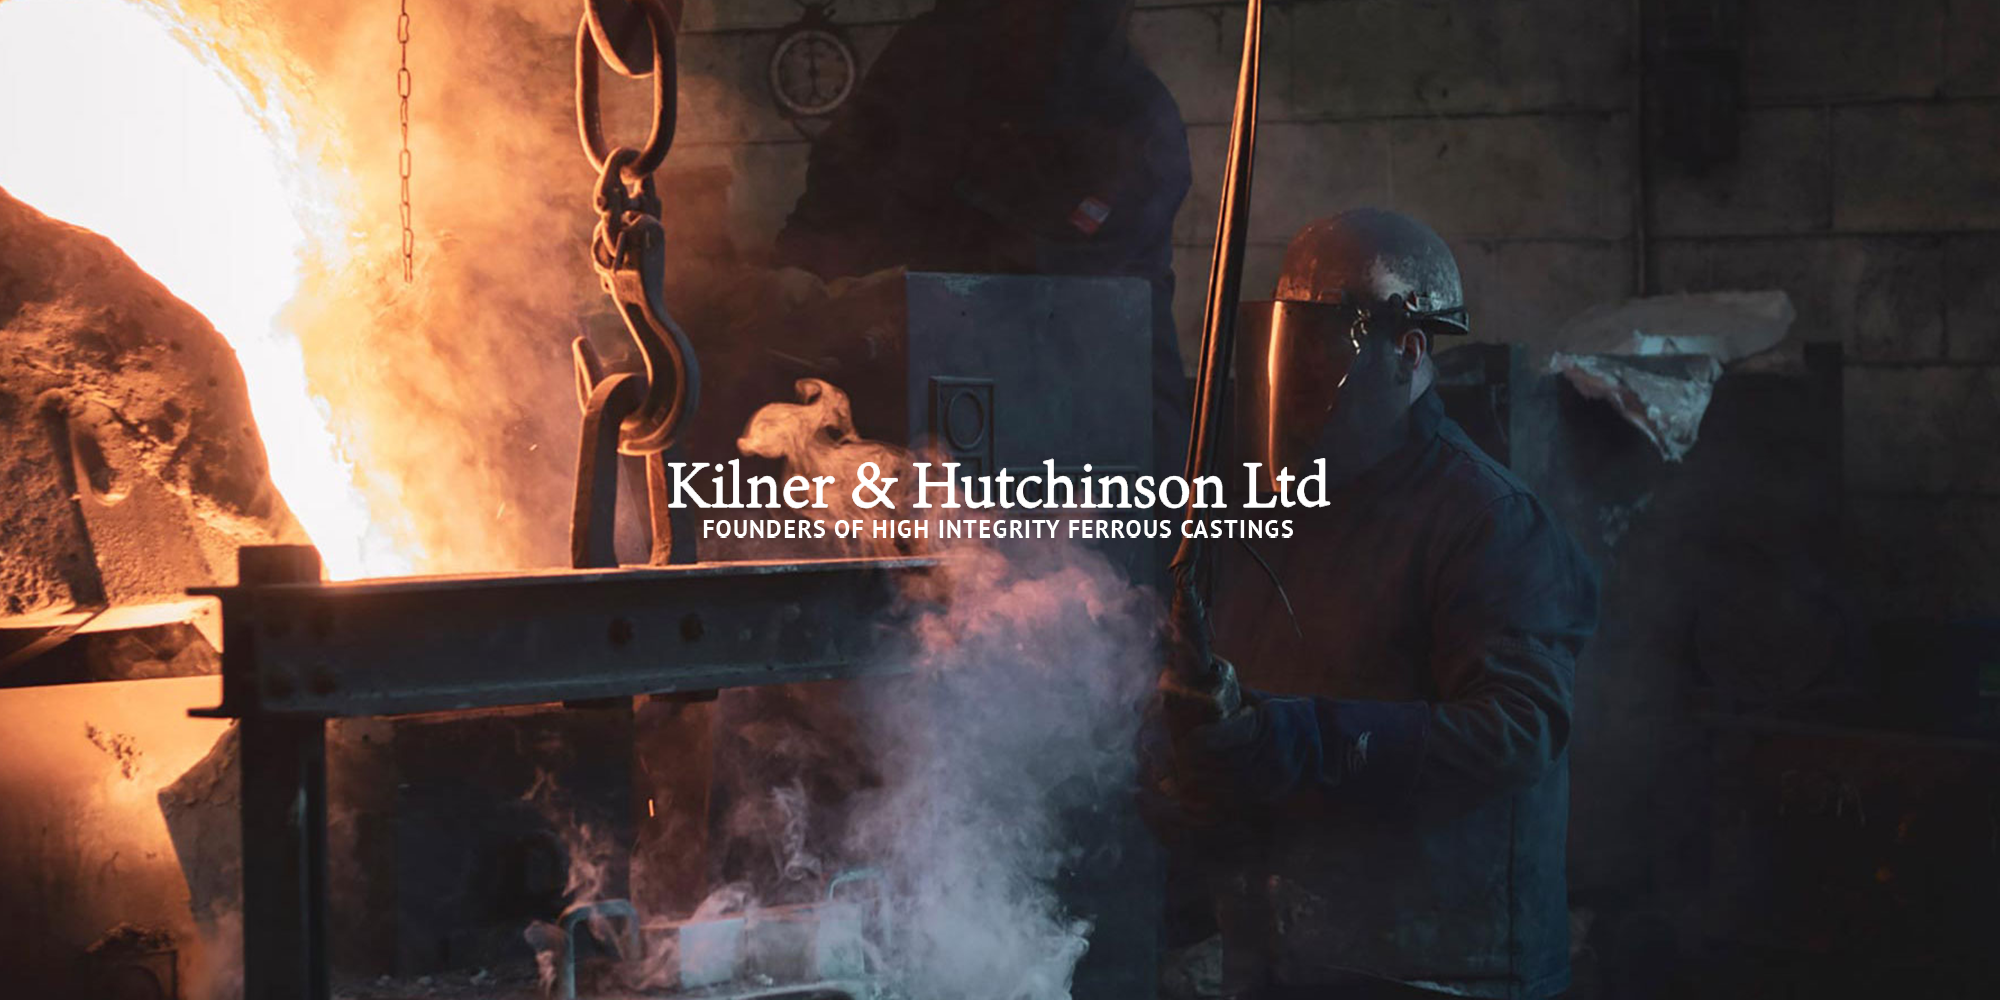 Kilner and Hutchinson logo on an image of a person wearing a welding mask in front of a forge